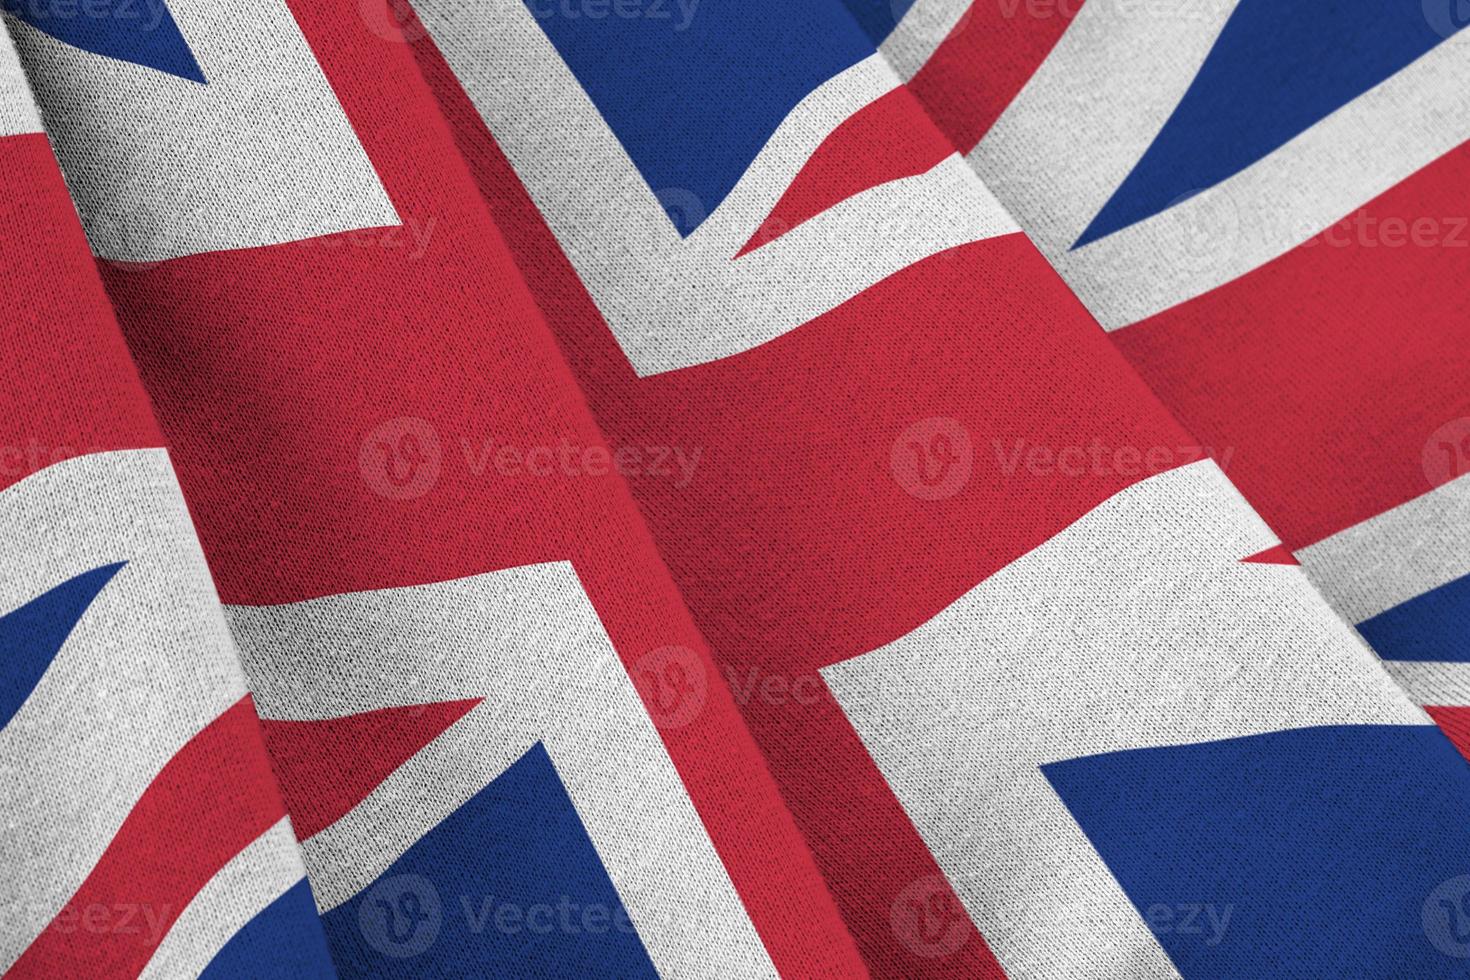 Great britain flag with big folds waving close up under the studio light indoors. The official symbols and colors in banner photo